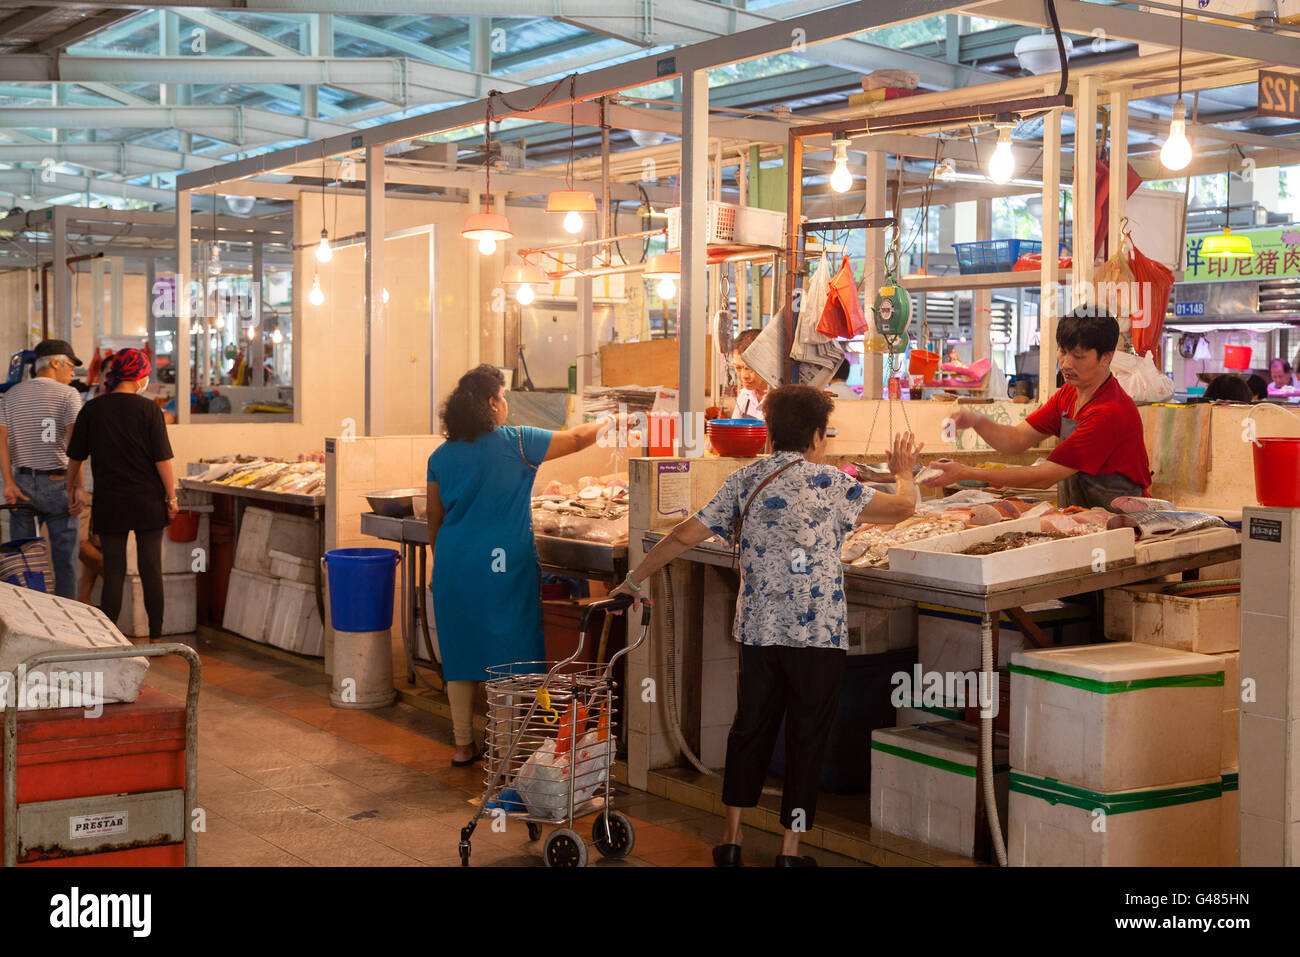 Singapore, Singapore - December 11, 2014: A fishmonger at a local wet market in Singapore helping a customer. For local resident Stock Photo